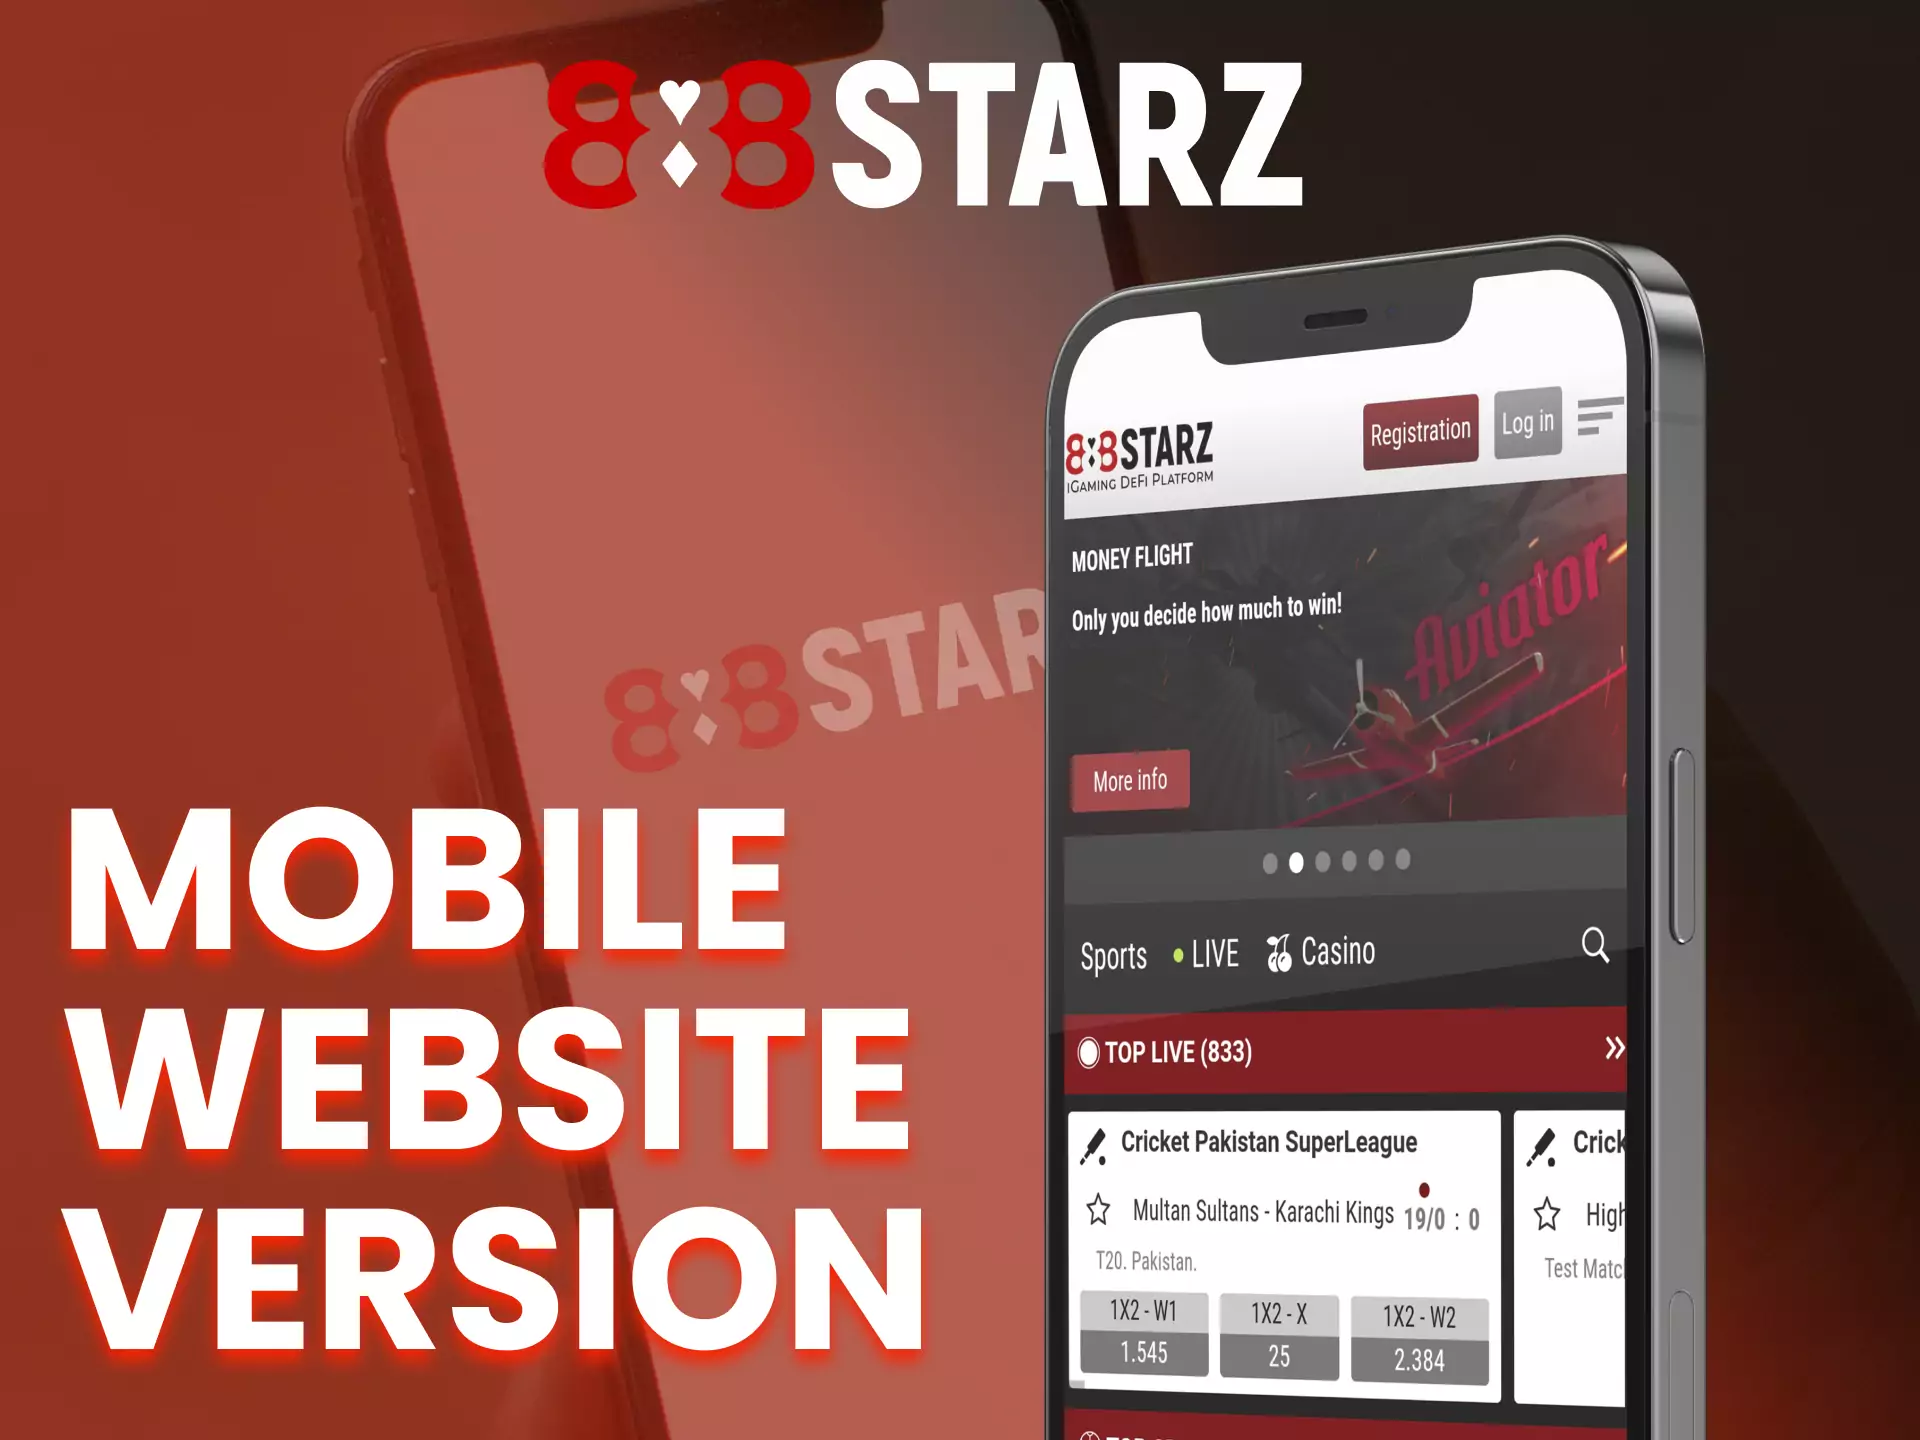 Use 888starz mobile website version in any place.